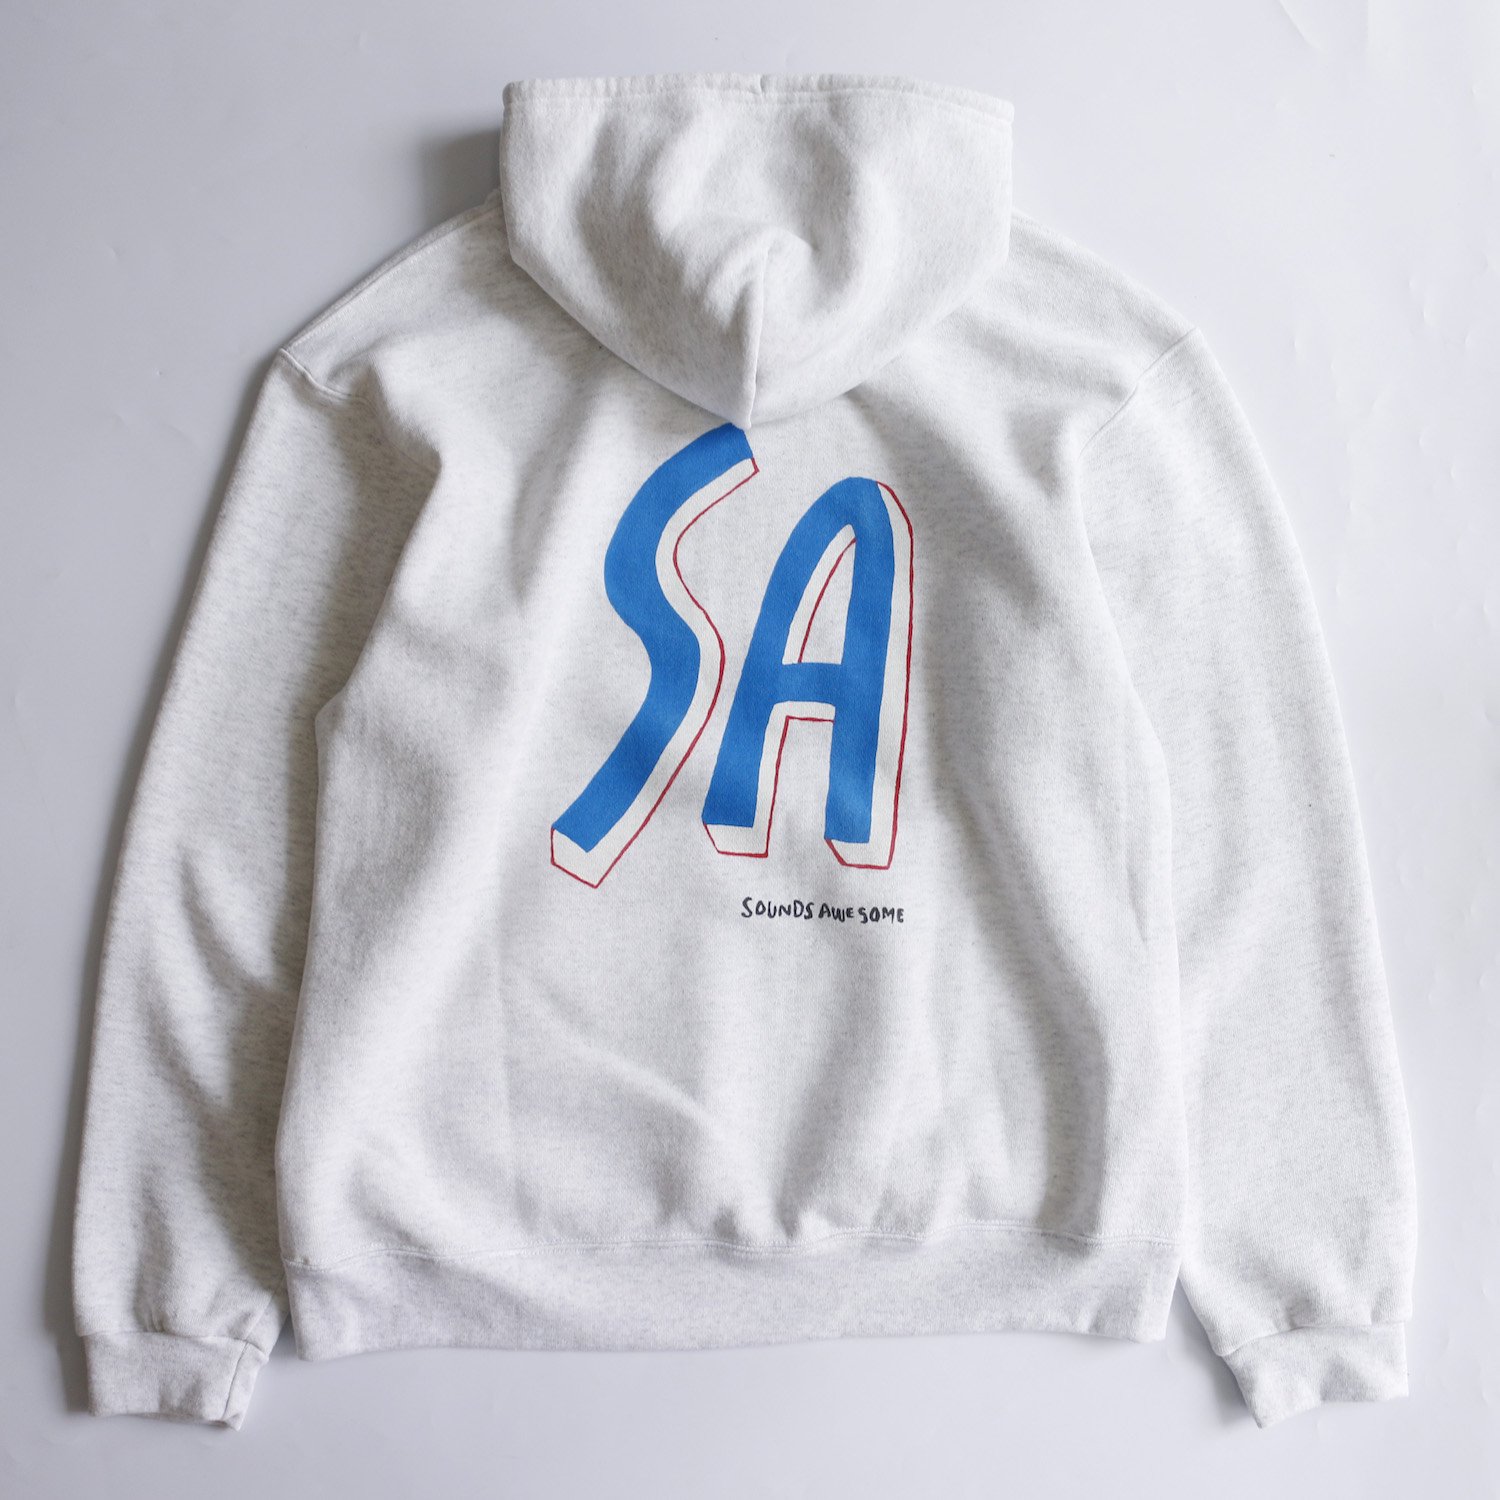 <img class='new_mark_img1' src='https://img.shop-pro.jp/img/new/icons8.gif' style='border:none;display:inline;margin:0px;padding:0px;width:auto;' />SOUNDS AWESOME / SA Logo printed Parka